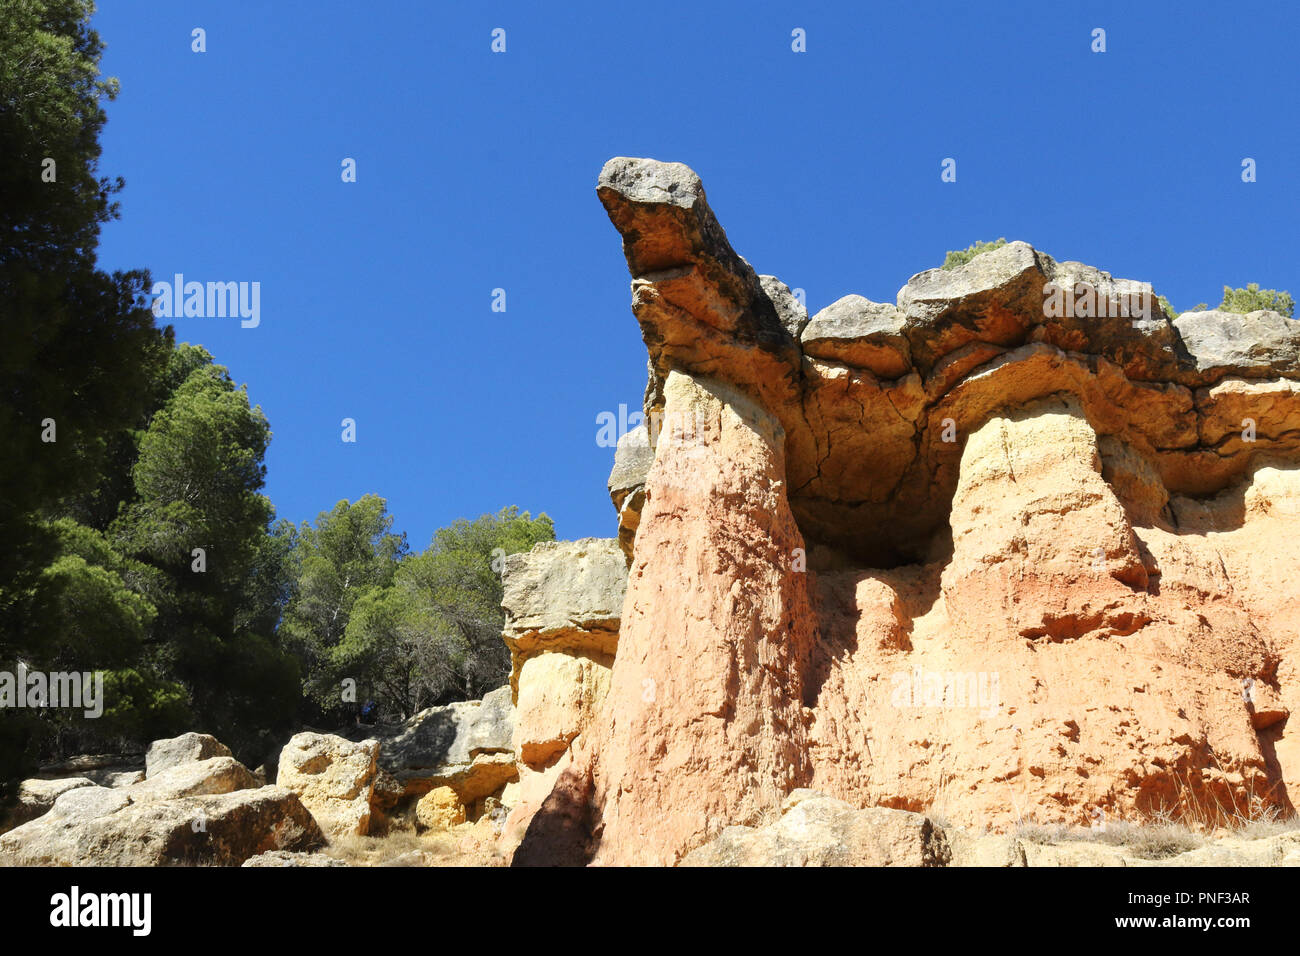 A protruding red rock with trees and a deep blue sky in the canyon style hills of Anento, a small town in Aragon, Spain Stock Photo